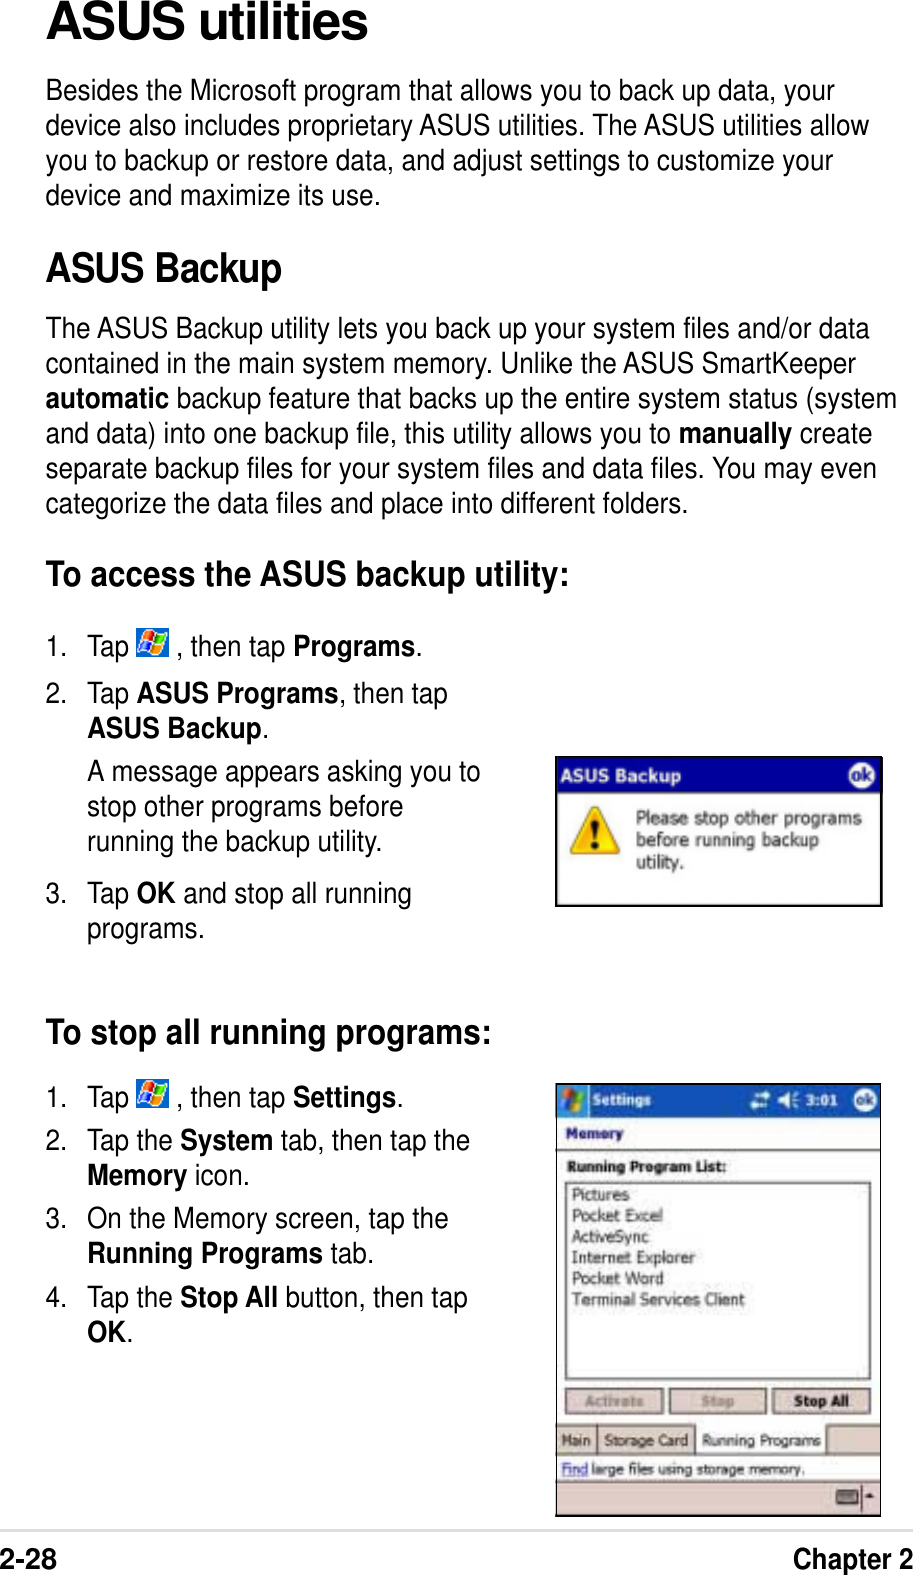 2-28Chapter 21. Tap   , then tap Settings.2. Tap the System tab, then tap theMemory icon.3. On the Memory screen, tap theRunning Programs tab.4. Tap the Stop All button, then tapOK.2. Tap ASUS Programs, then tapASUS Backup.A message appears asking you tostop other programs beforerunning the backup utility.3. Tap OK and stop all runningprograms.To stop all running programs:ASUS utilitiesBesides the Microsoft program that allows you to back up data, yourdevice also includes proprietary ASUS utilities. The ASUS utilities allowyou to backup or restore data, and adjust settings to customize yourdevice and maximize its use.ASUS BackupThe ASUS Backup utility lets you back up your system files and/or datacontained in the main system memory. Unlike the ASUS SmartKeeperautomatic backup feature that backs up the entire system status (systemand data) into one backup file, this utility allows you to manually createseparate backup files for your system files and data files. You may evencategorize the data files and place into different folders.To access the ASUS backup utility:1. Tap   , then tap Programs.